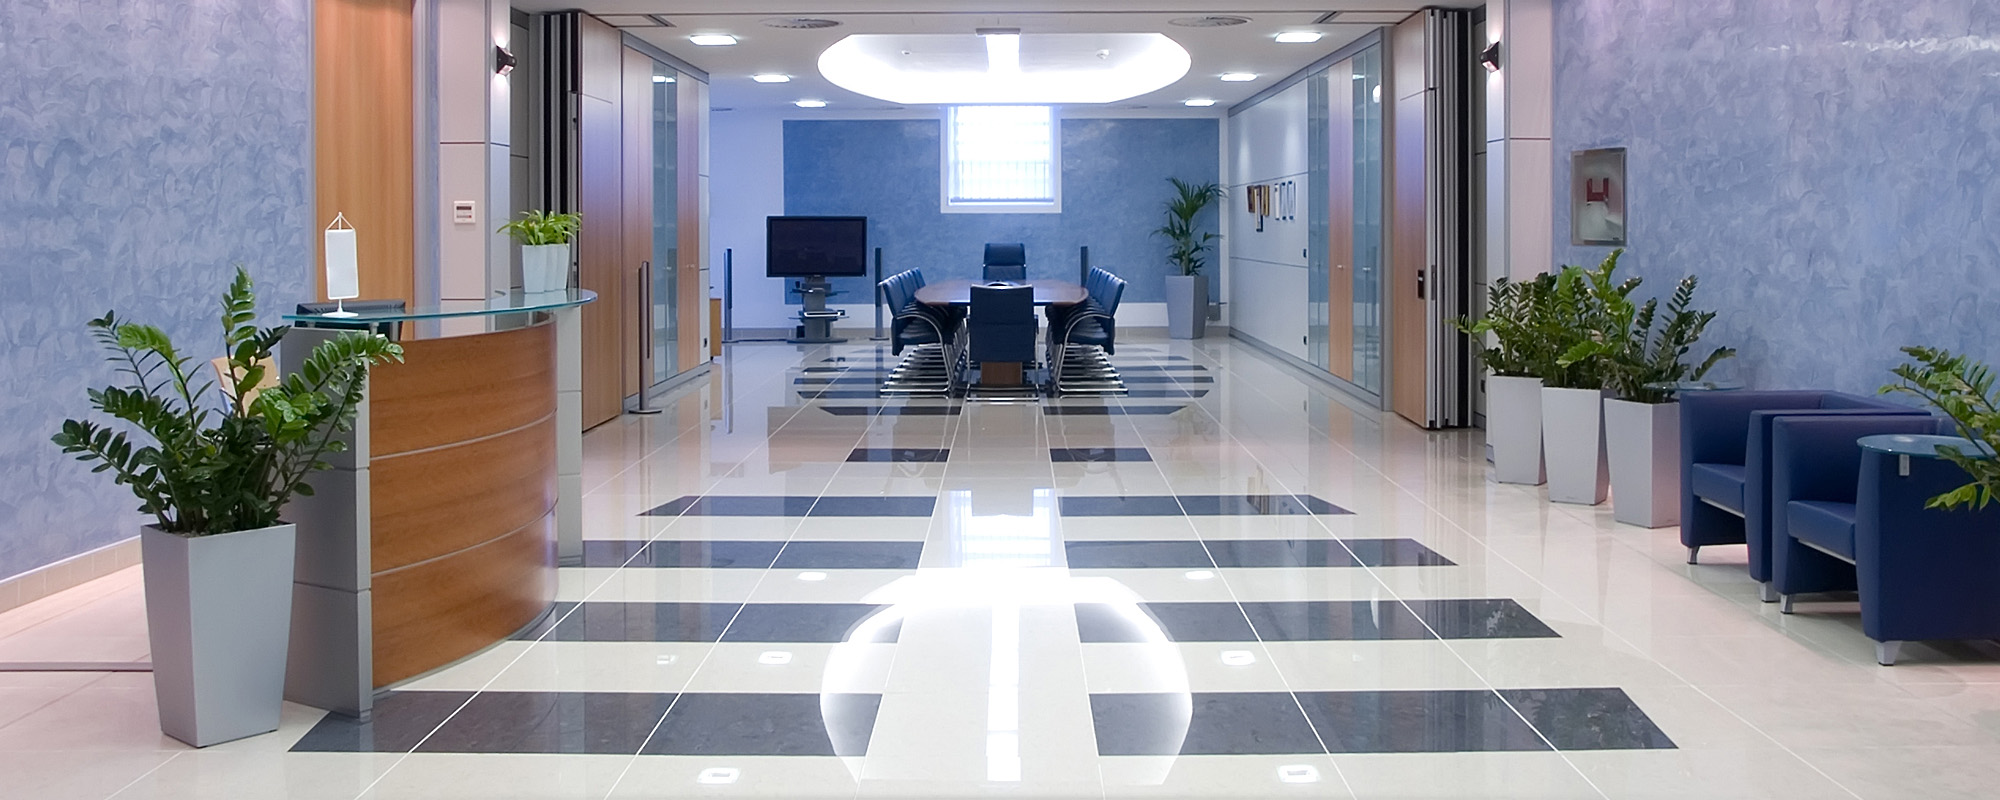 Commercial Cleaning, Janitorial Services | Austin, TX